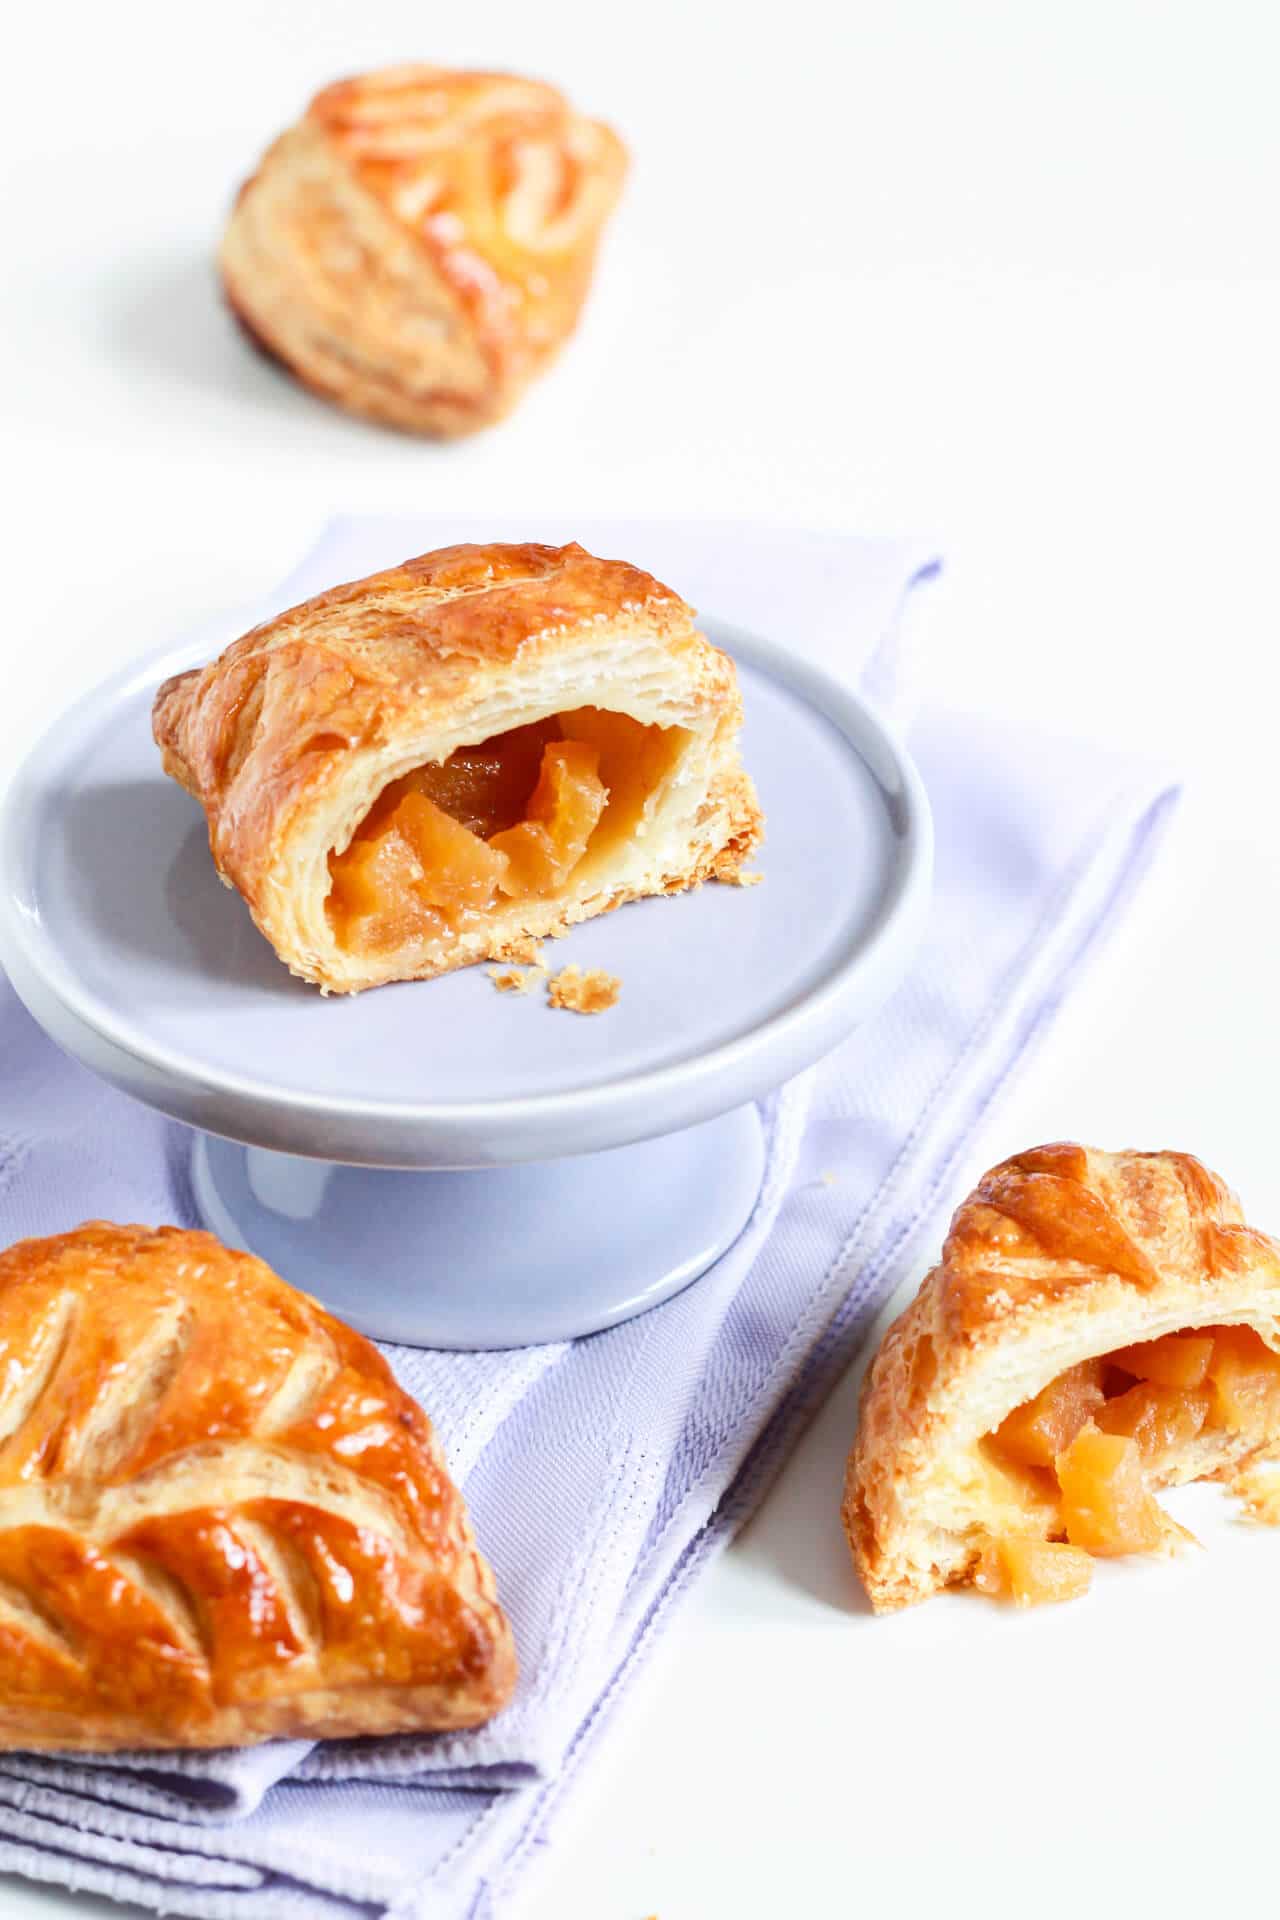 Apple turnovers with one cut open and displayed on a mini cake stand set on a purple linen napkin